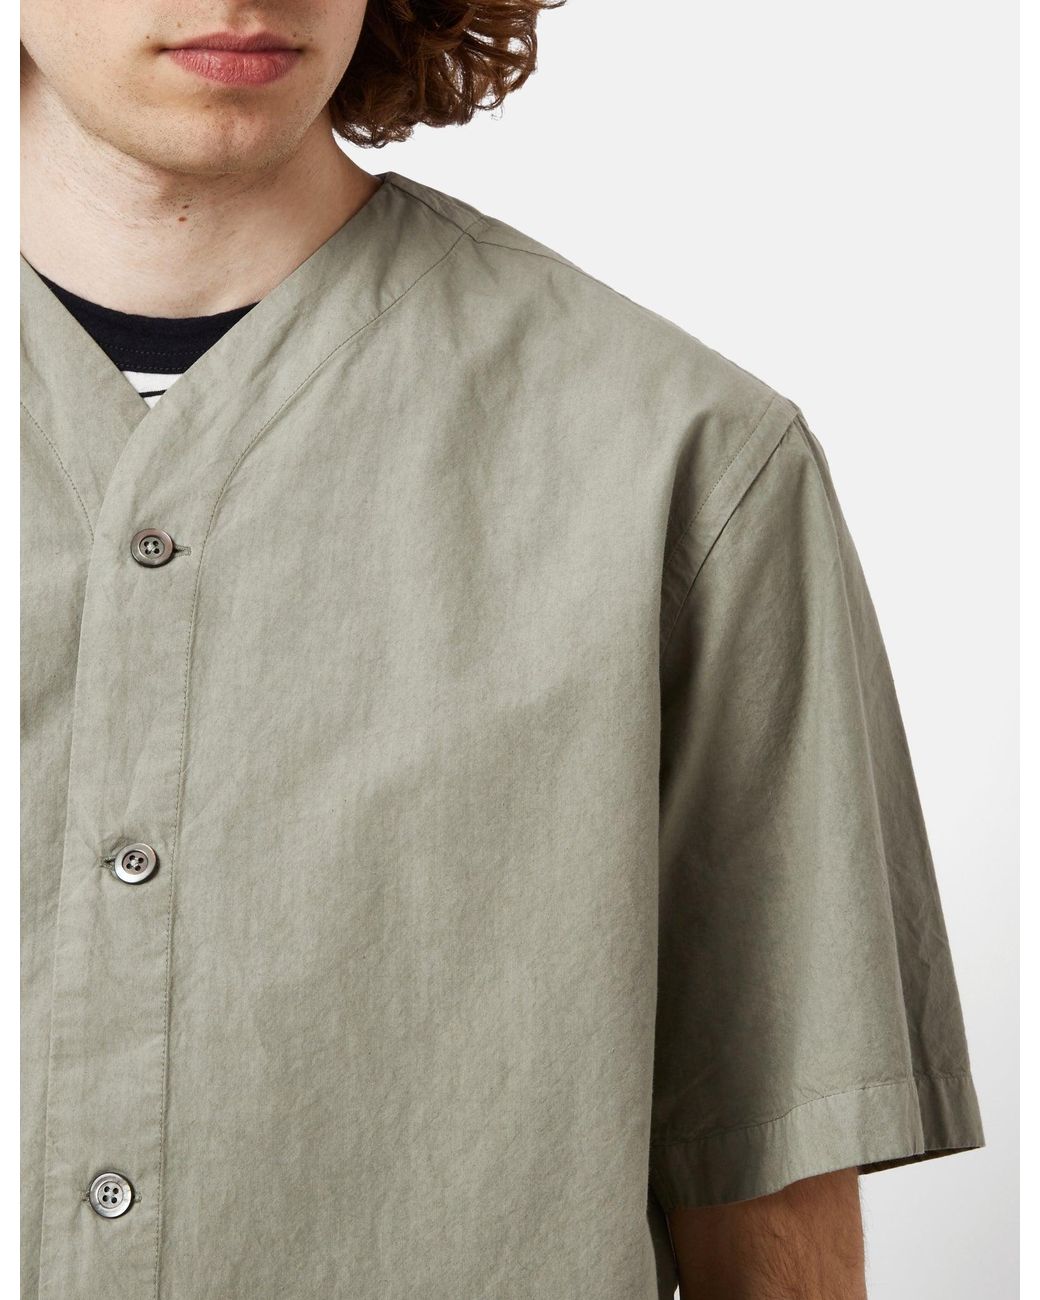 Norse Projects Erwin Typewriter Short Sleeve Shirt in Grey for Men